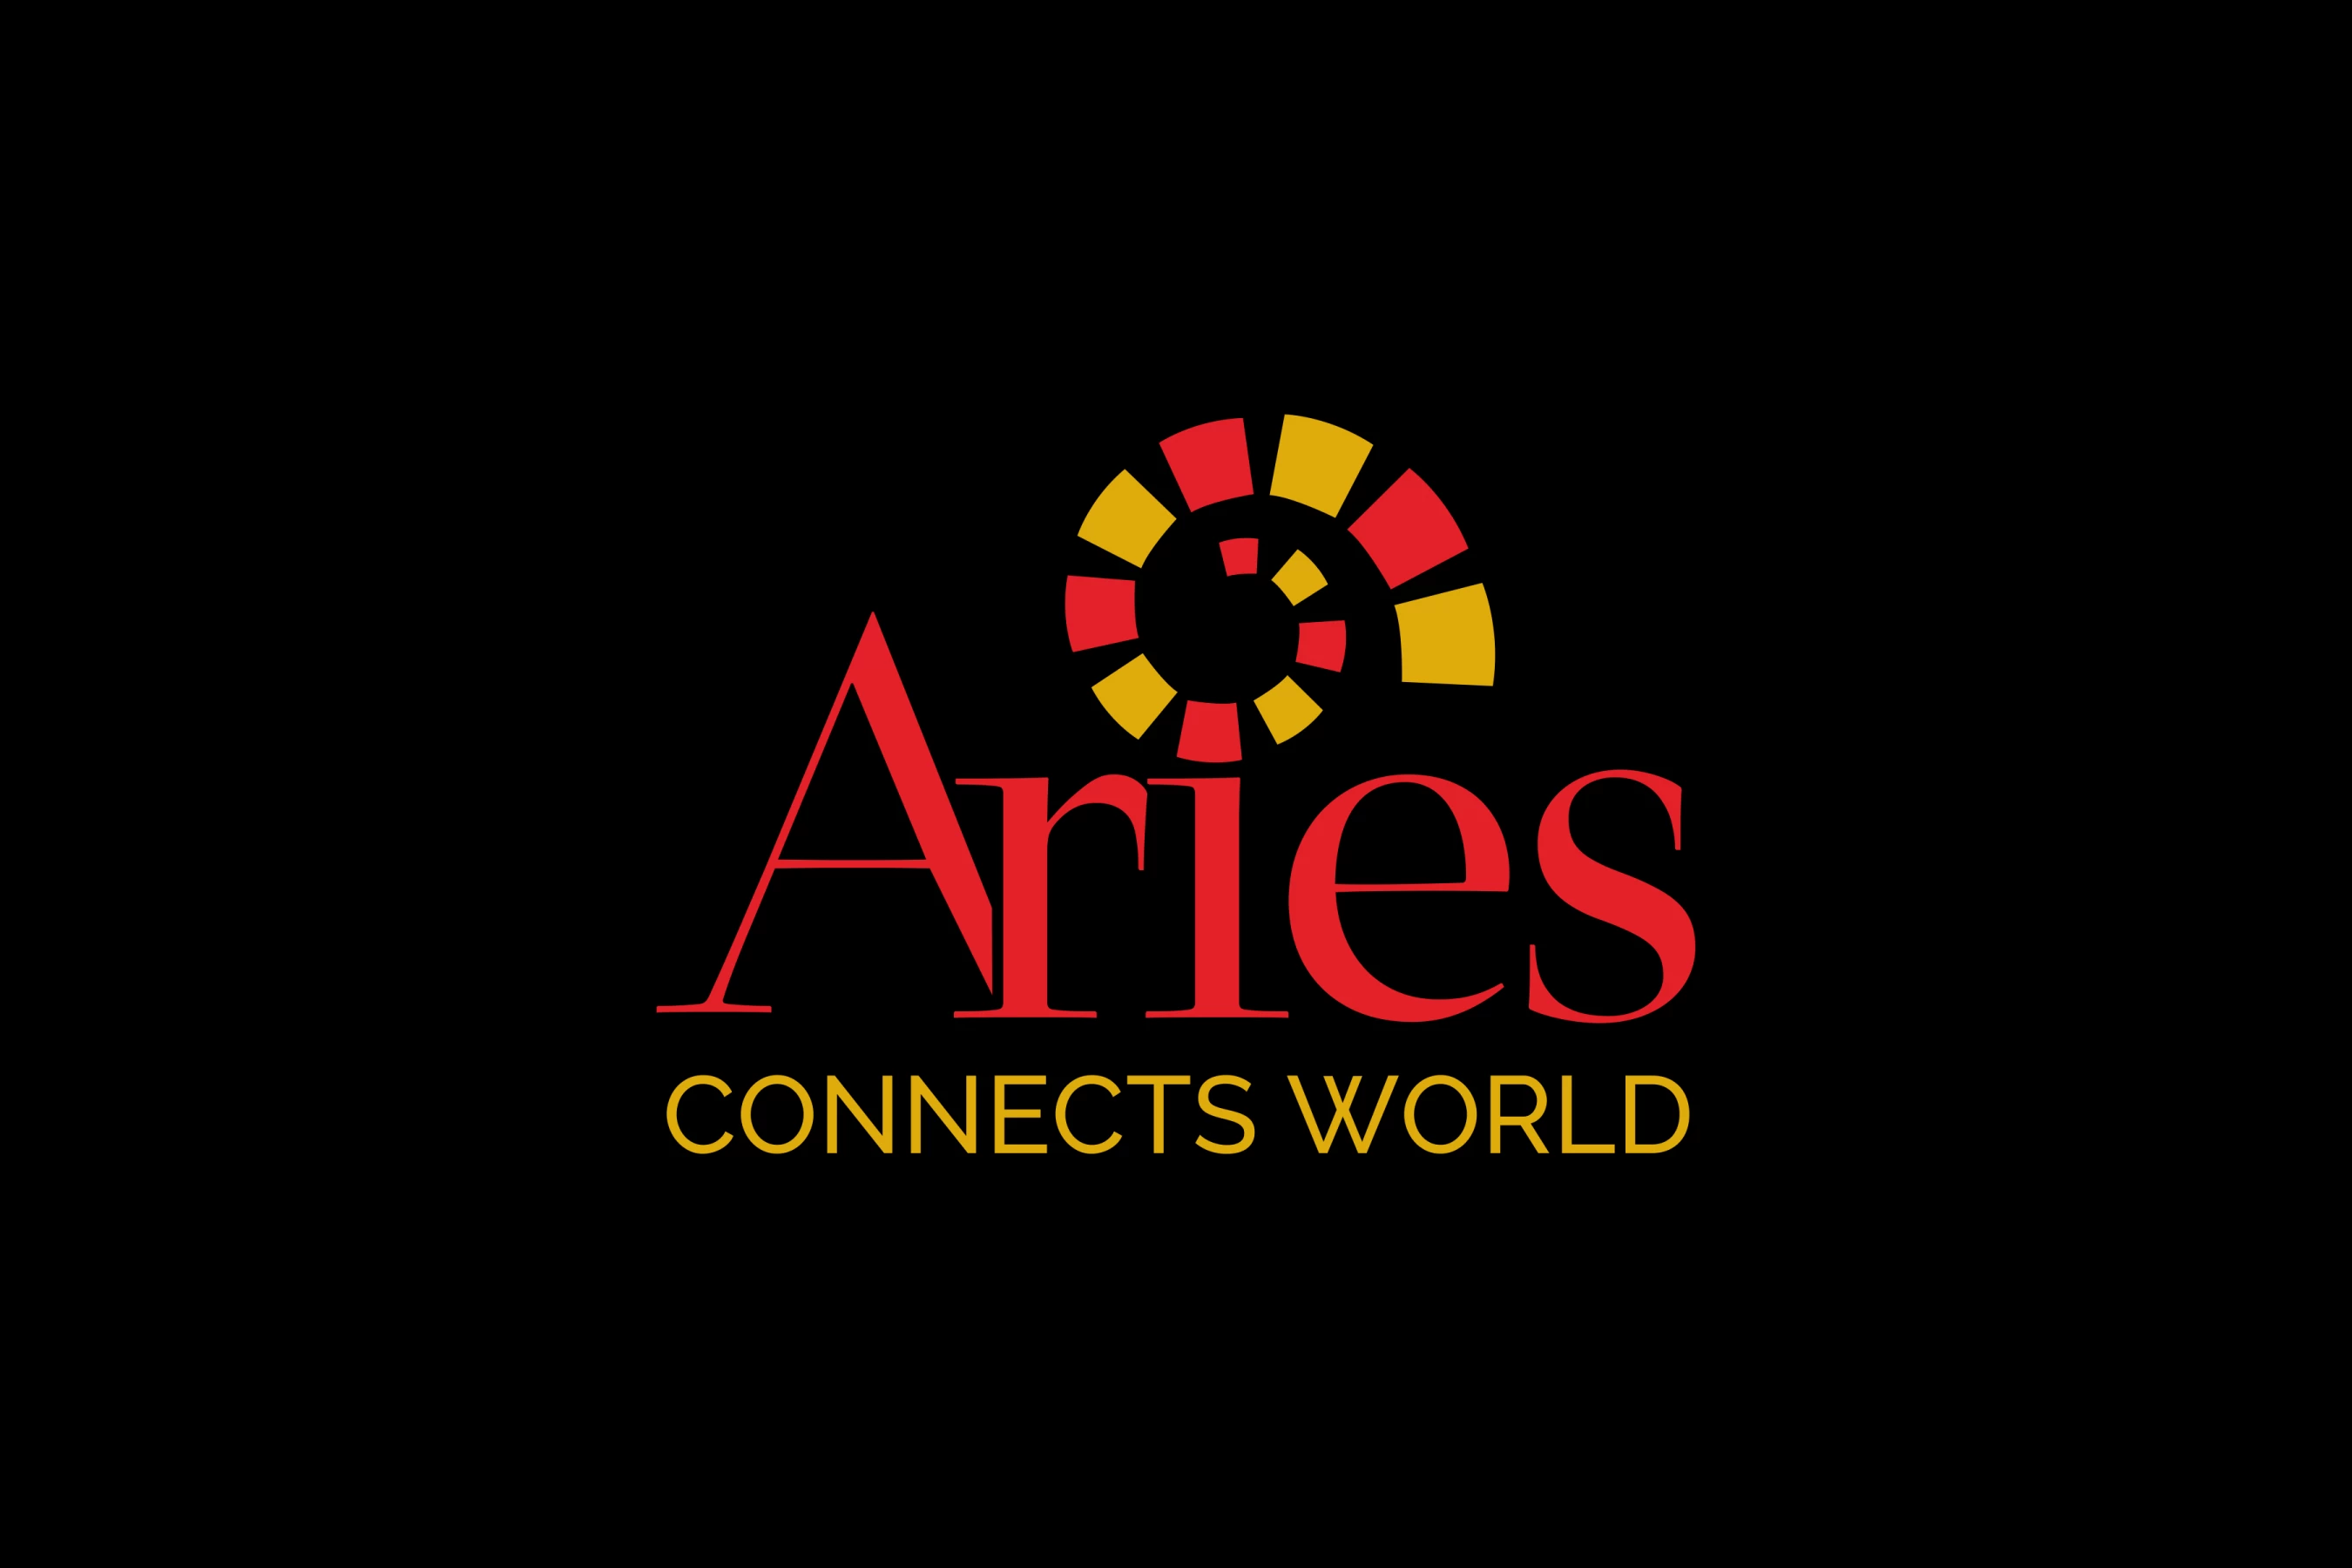 ARIES-CONNECTS-WORLD